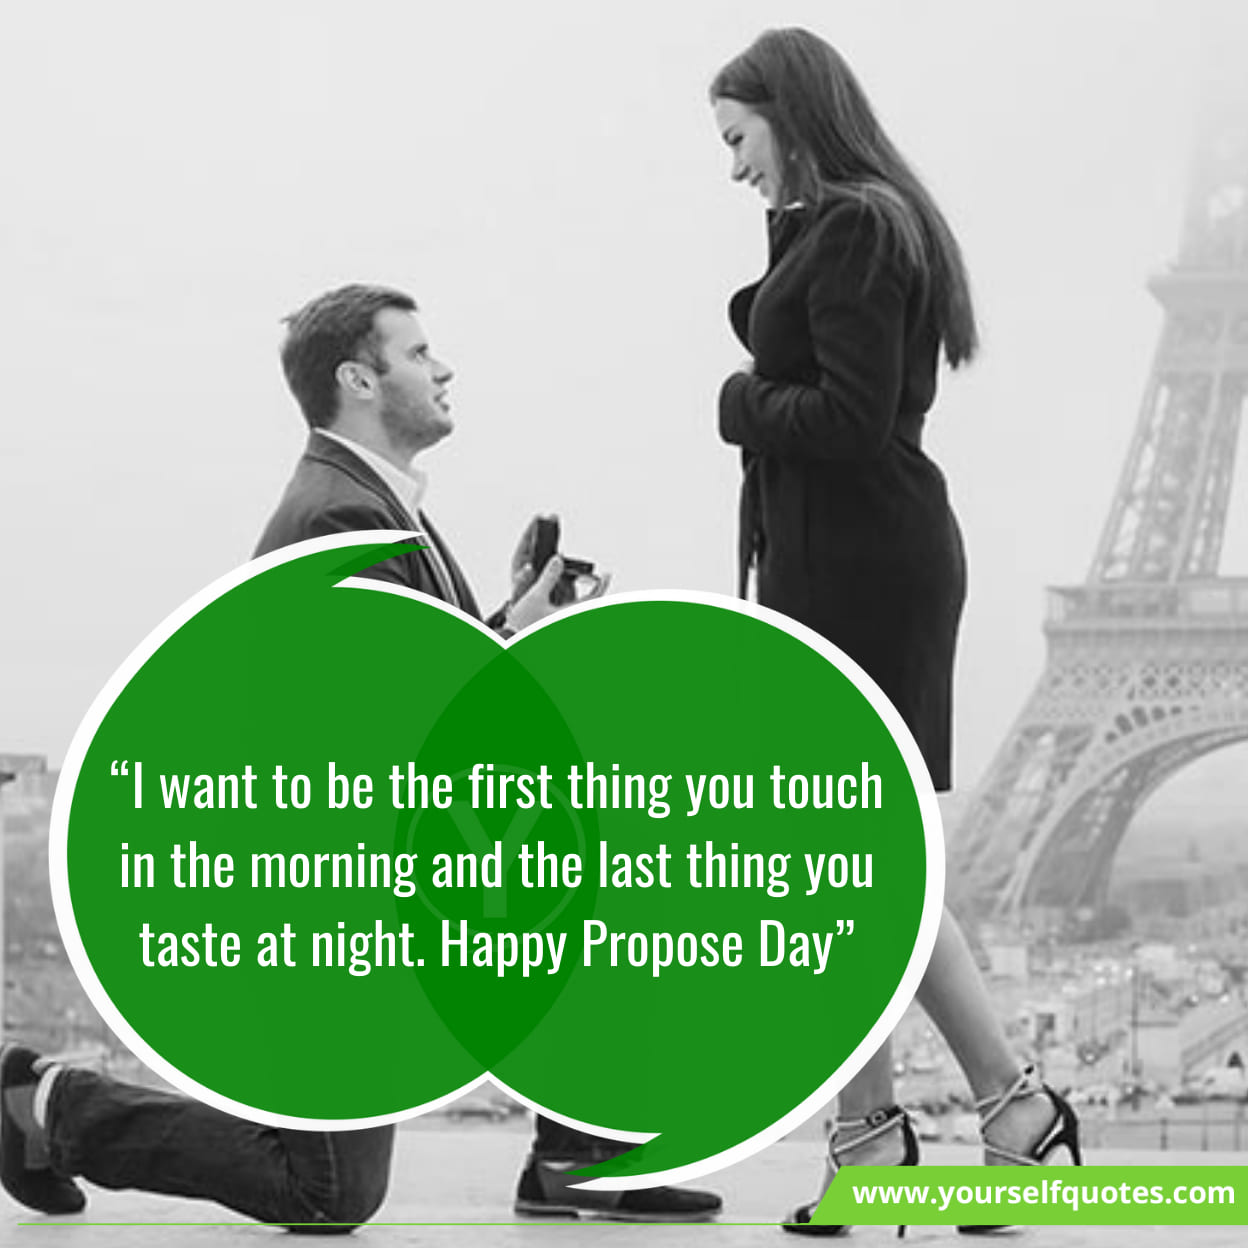 Propose Day Messages, Sayings & Greetings